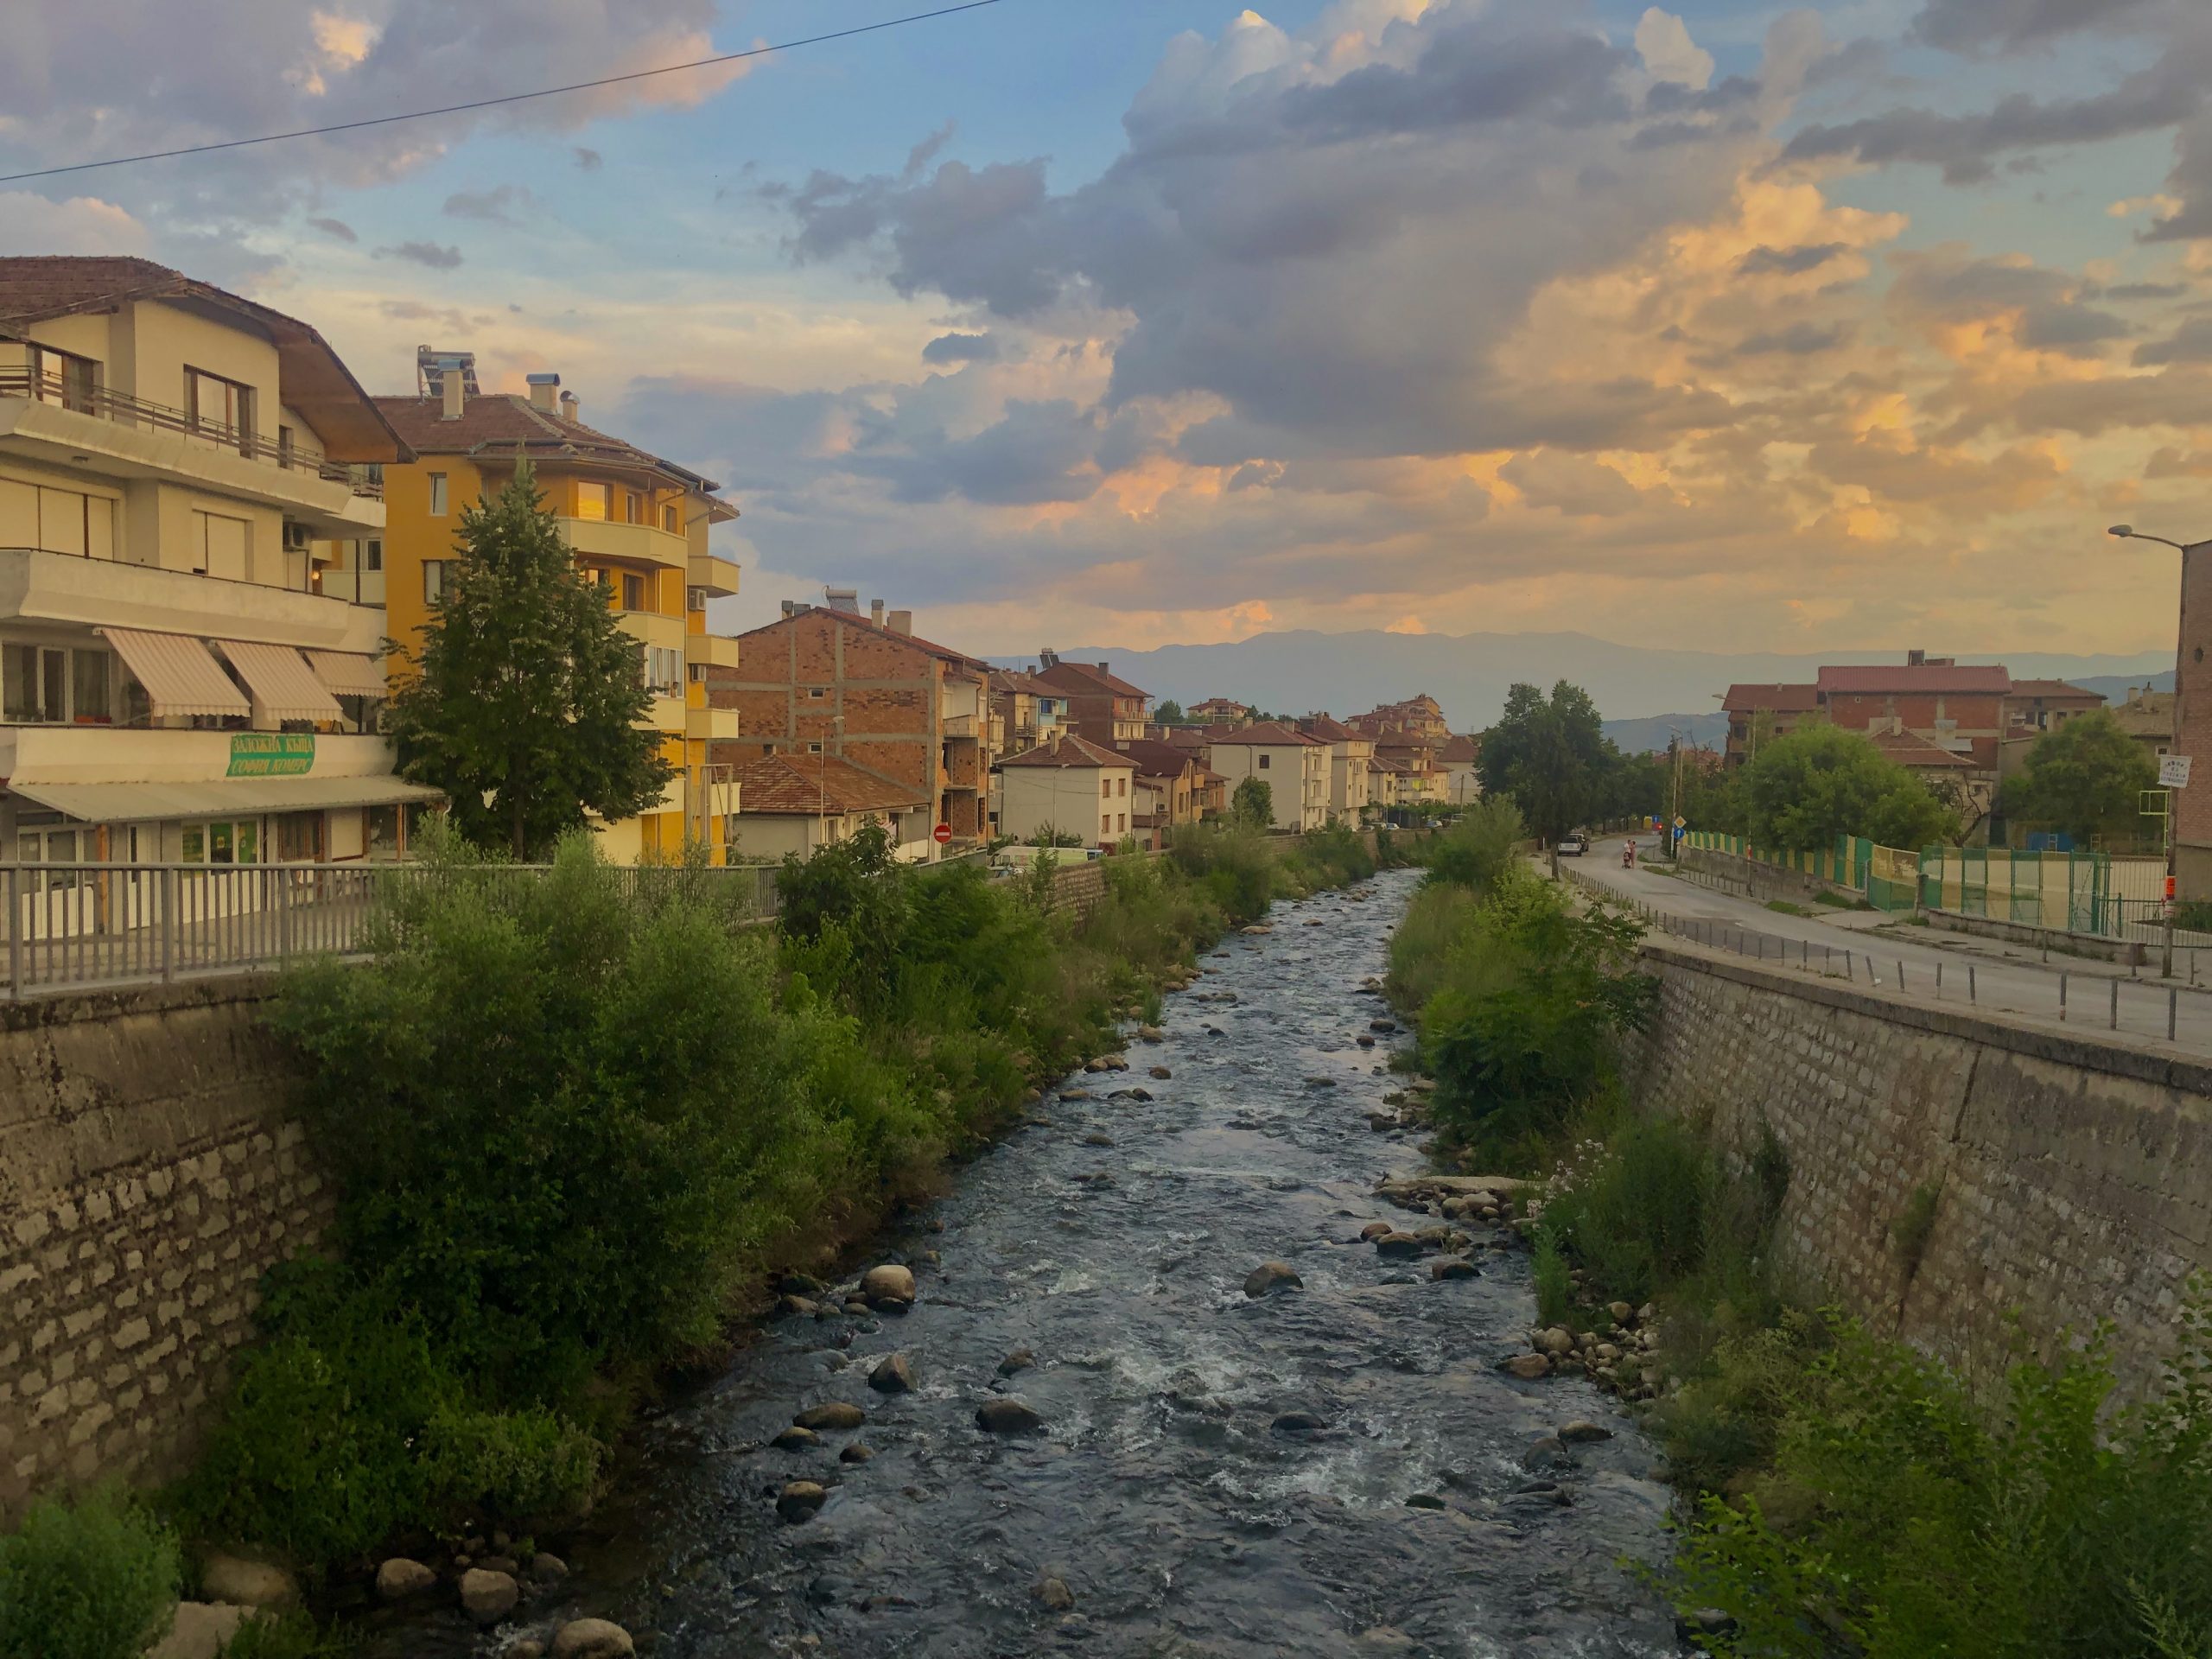 Featured image: A photograph of the Struma river, which cuts through the middle of the image (and also through the middle of Sandanski, Bulgaria), flanked by levees on either side. The water level is pretty low, so there is vegetation growing along the levees. On the left side of the river is a street and apartment complexes. On the right there is a street beyond which the edges of a school yard are visible. There is a mountain range visible in the distance. Photo by the author.